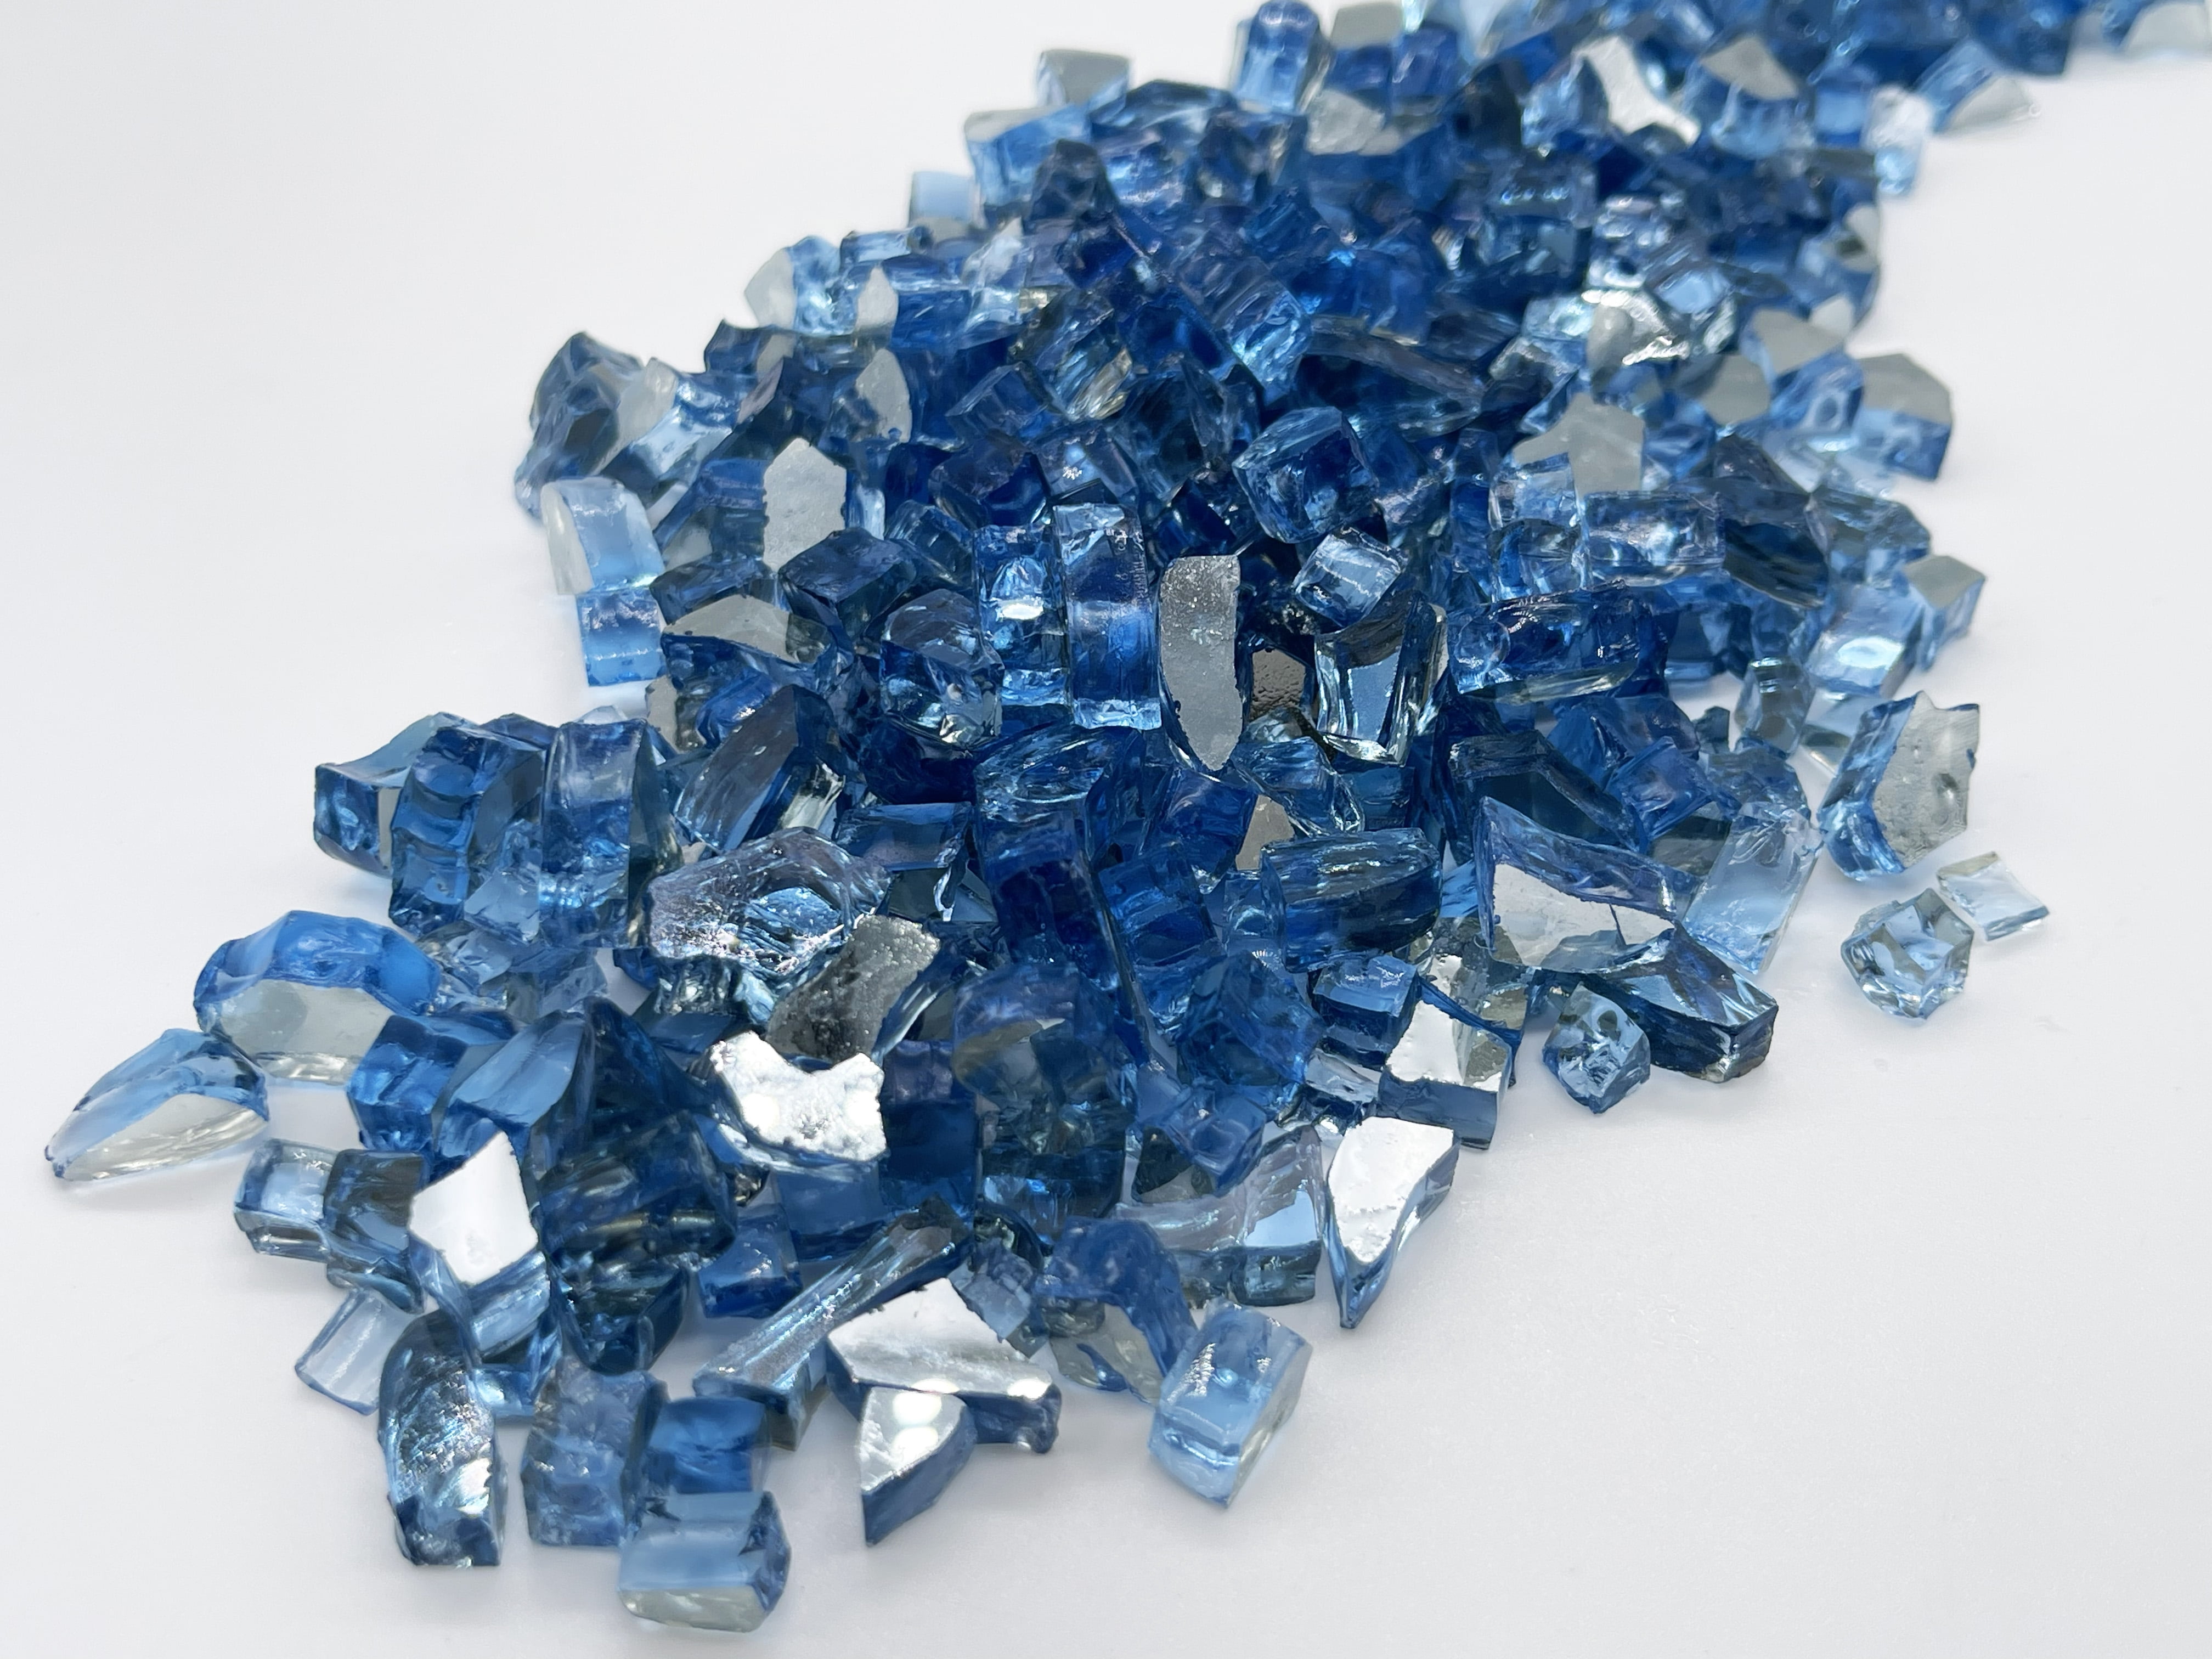 Natural Gas and Propane Fire Glass Pellets Rocks High Luster Premium Tempered Fire Pit Glass Fireplace 10 Pounds of 1/2 In Pacific Blue Fire Glass Fire Table Reflective Fireglass for Fire Pit 